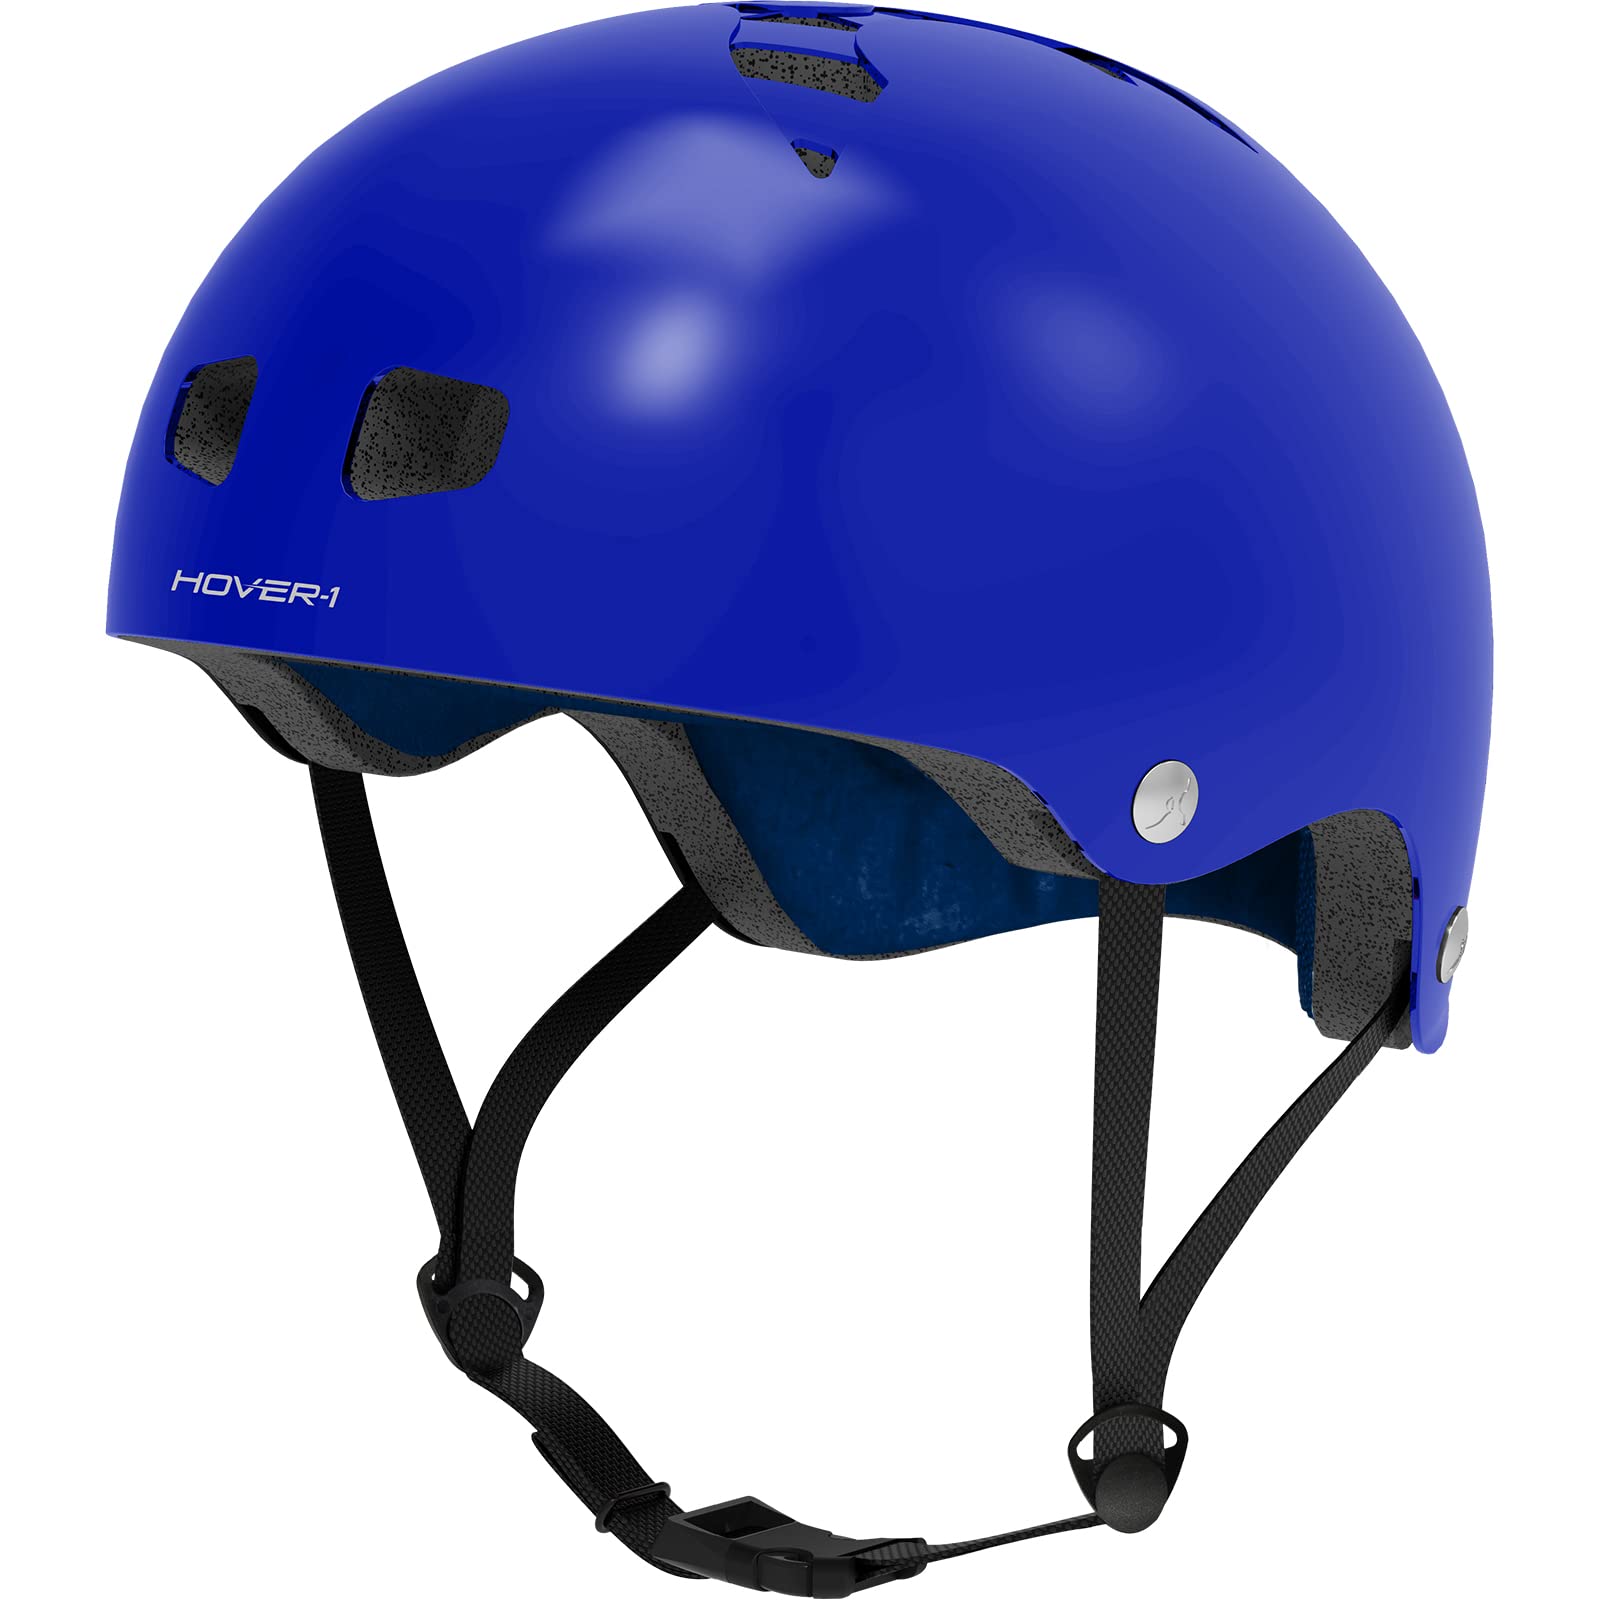 Hover-1 Kids' Hardshell Sport Helmet w/ Removable & Washable Liner: (Small, Blue) $12.15 + Free Shipping w/ Prime or on $25+